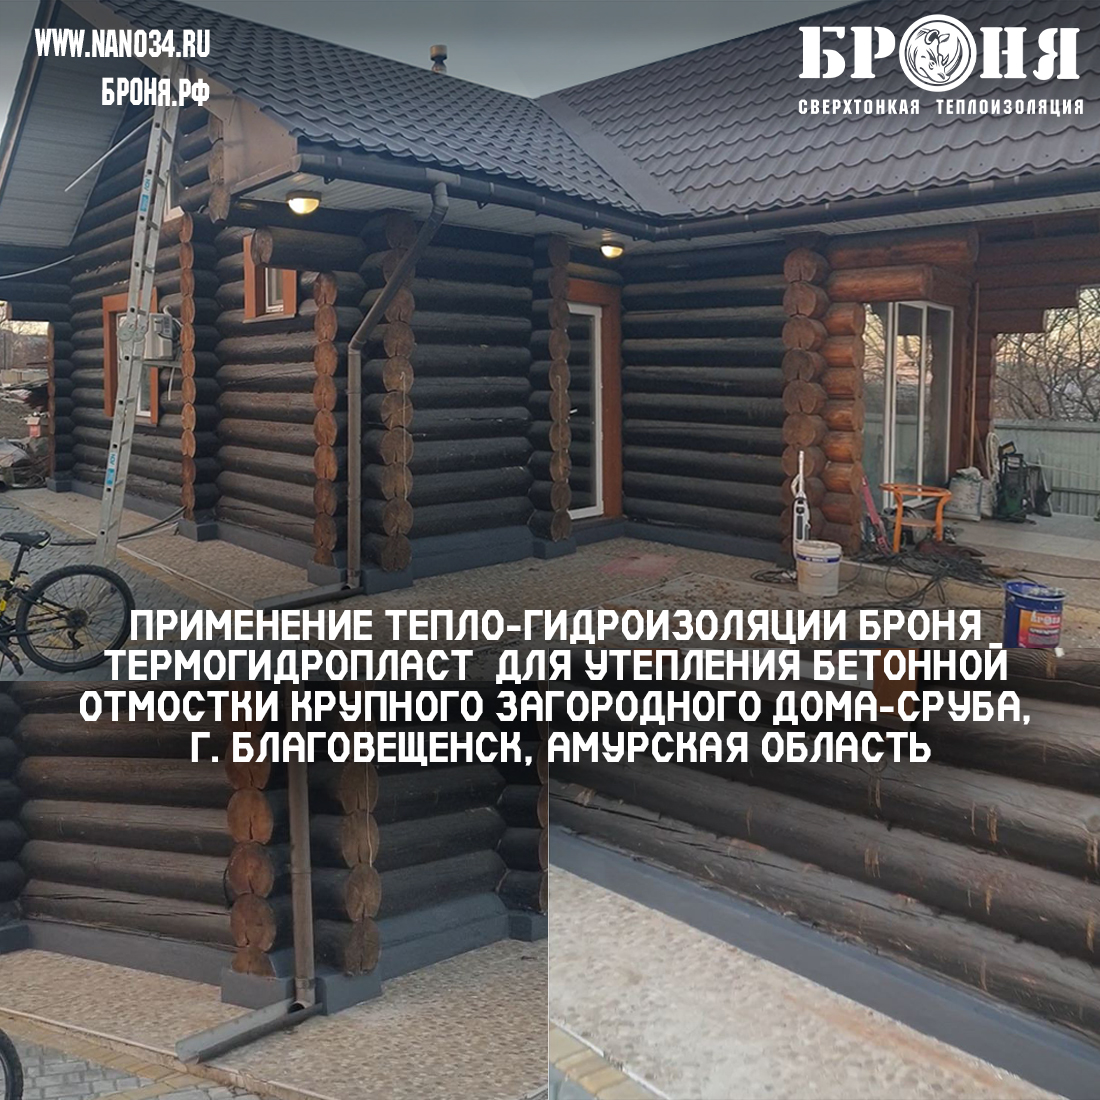 Application of thermal waterproofing Bronya ThermoHydroPlast for insulation of the base of a large suburban house-log house, Blagoveshchensk, Amur Region (photo and video)